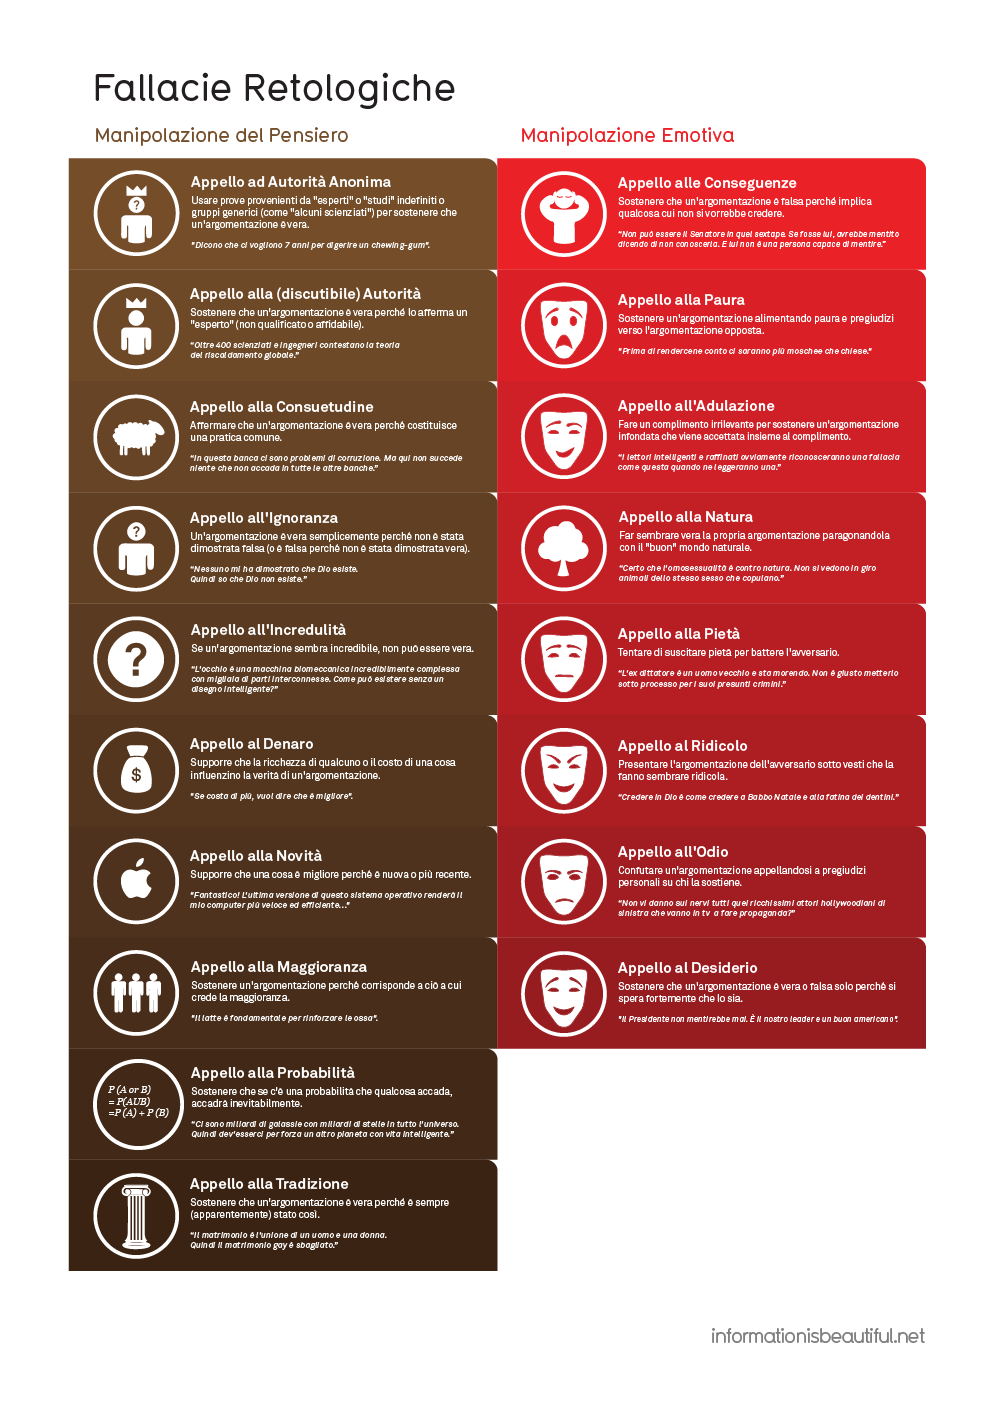 Rhetological Fallacies Poster PRINT-IT-YOURSELF-DOWNLOAD